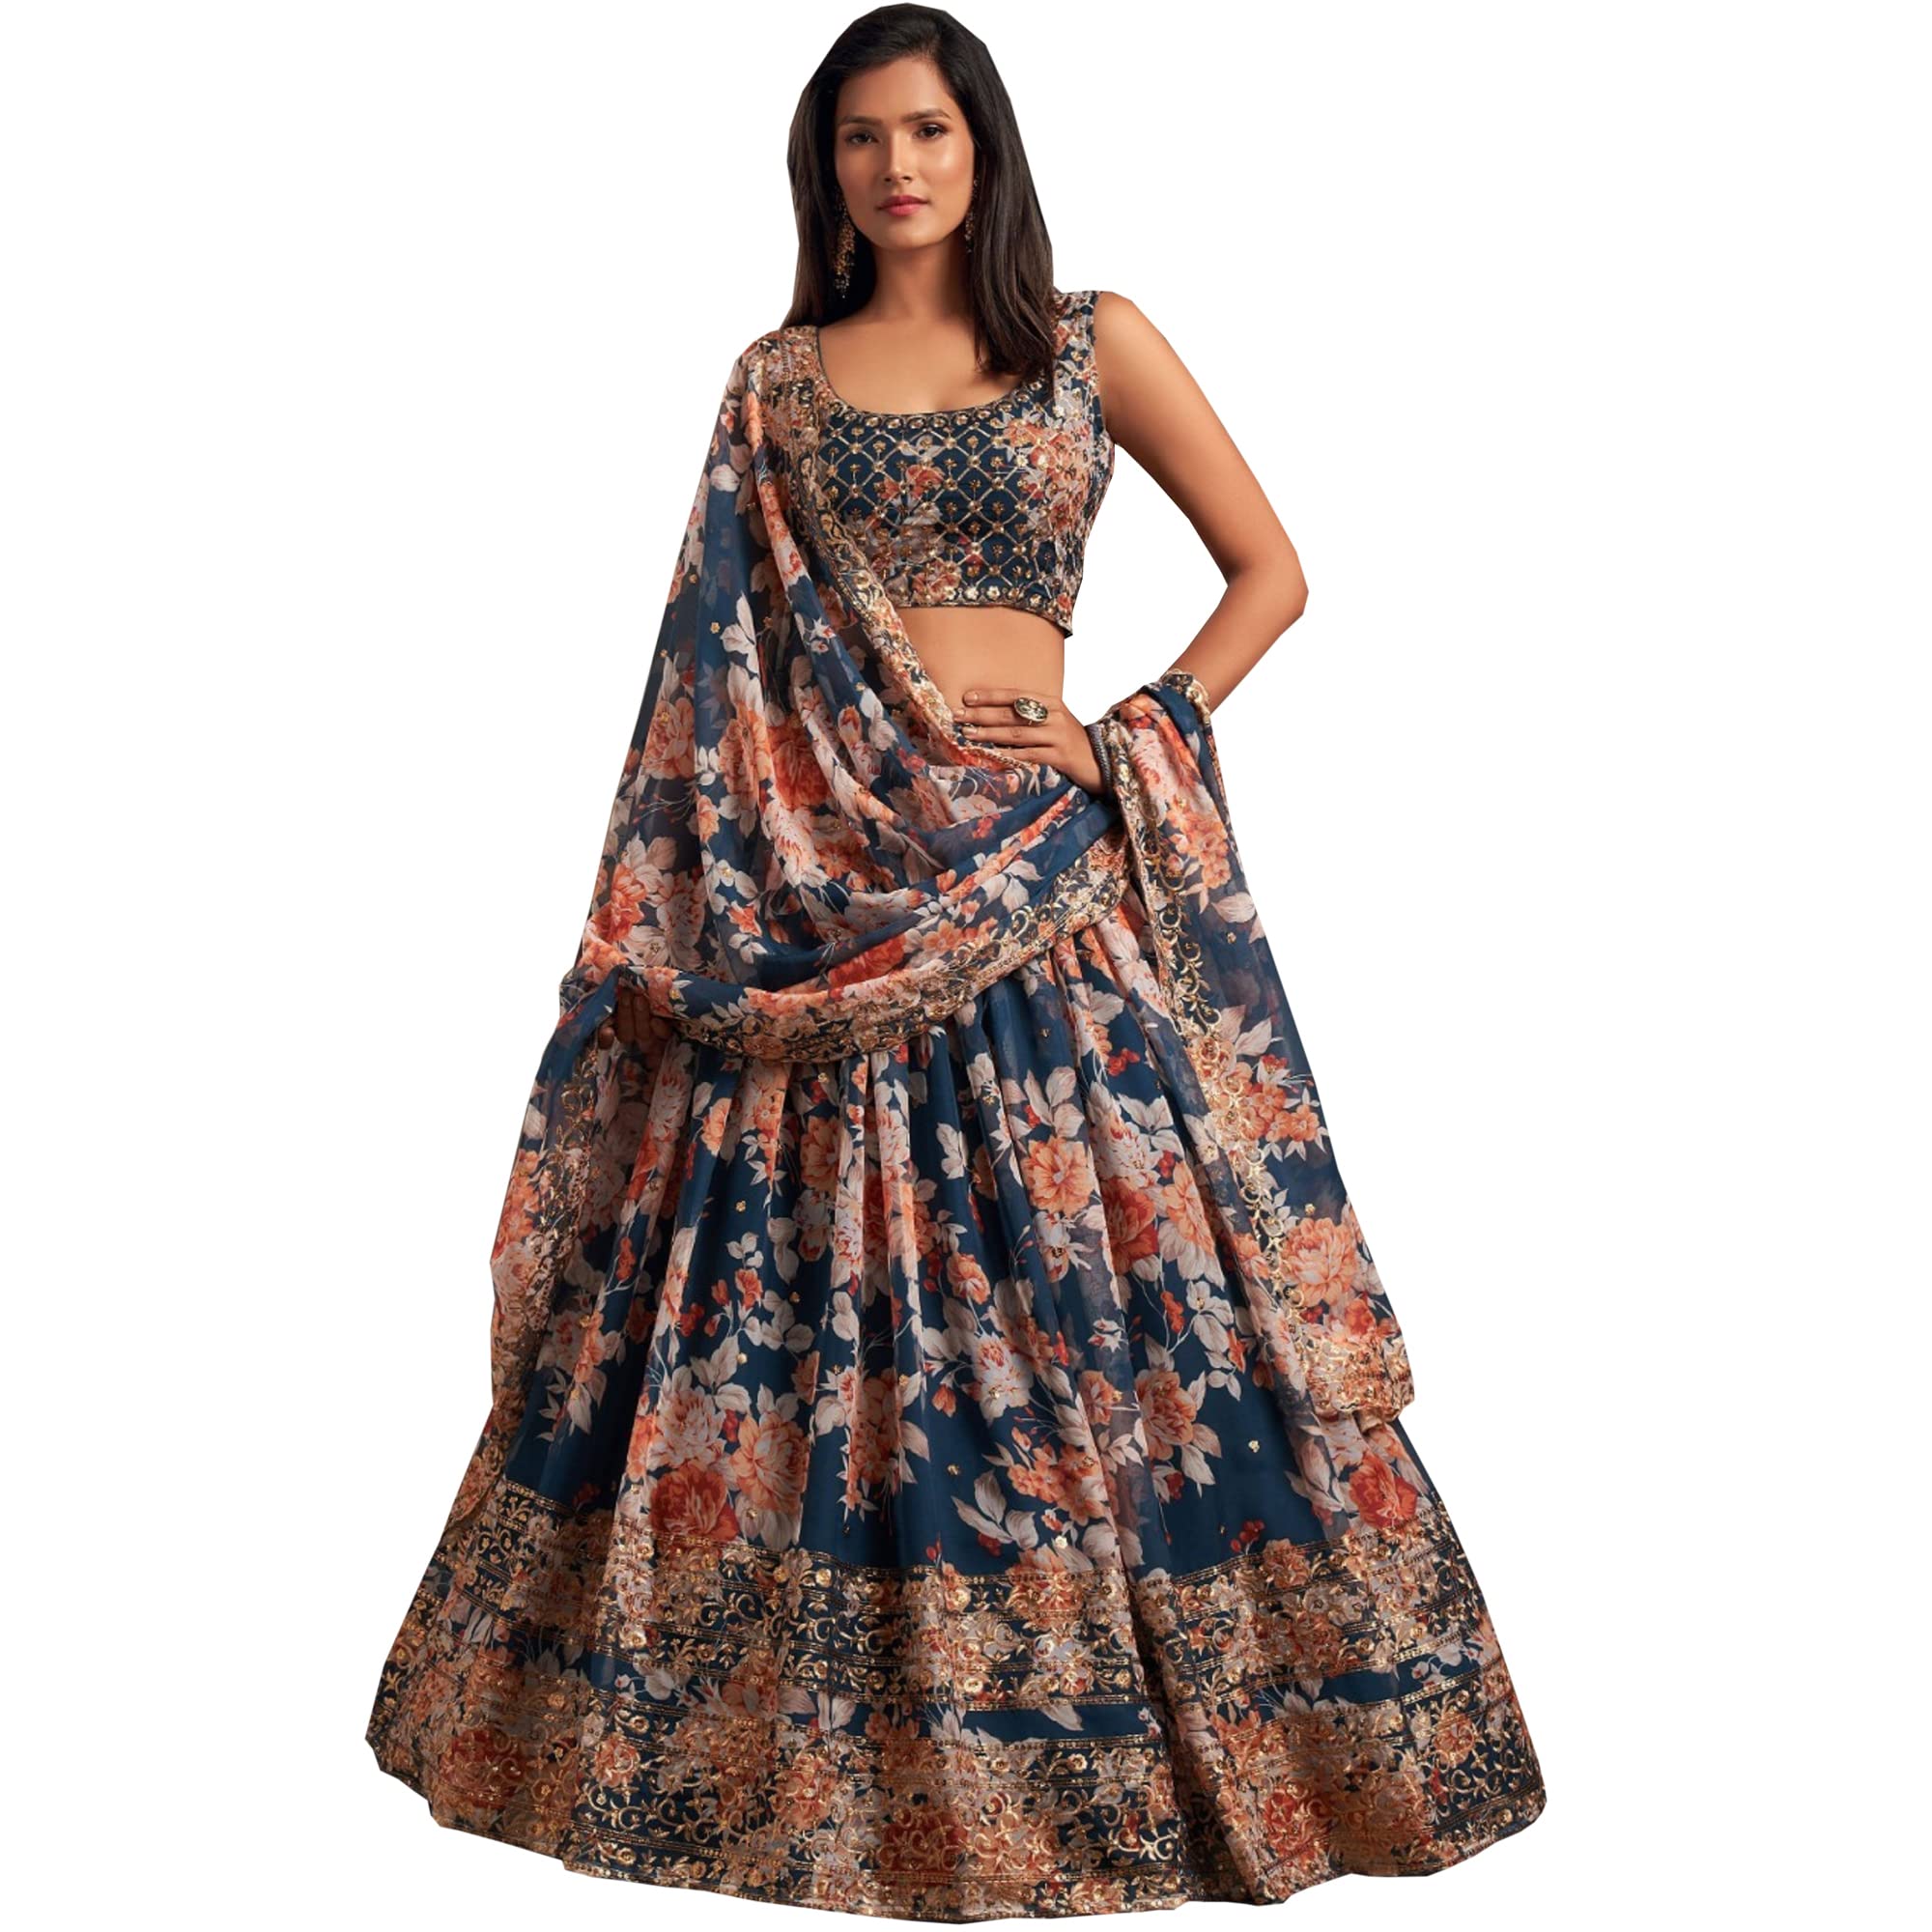 Sangeet Party Wear Lehenga Choli | Affordable Prices for Online Sales